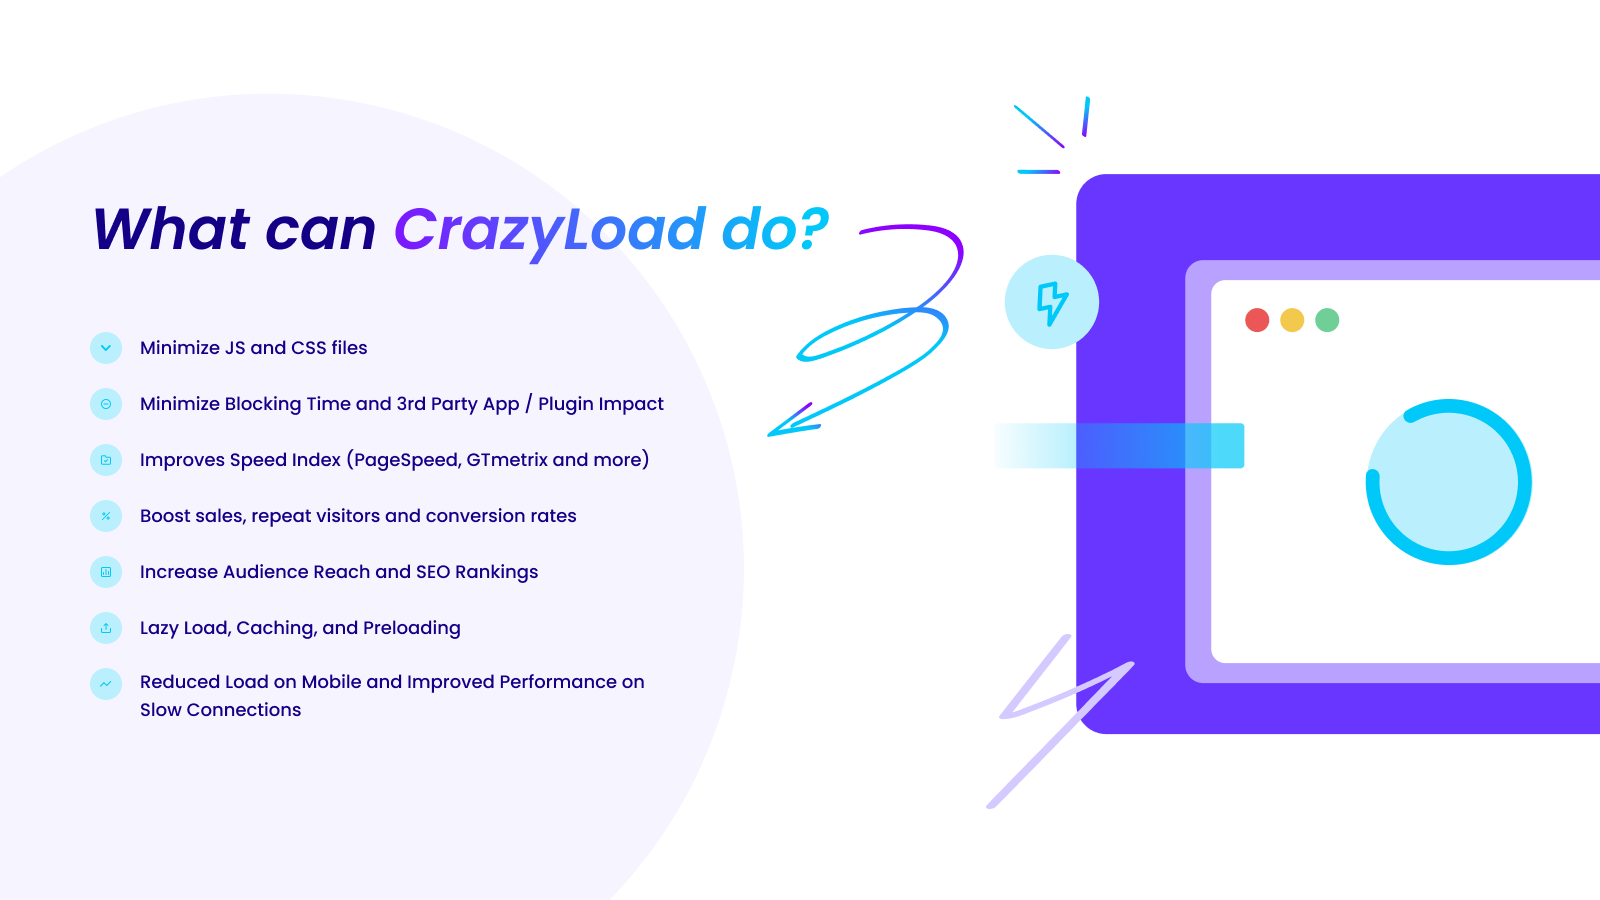 What can CrazyLoad do?